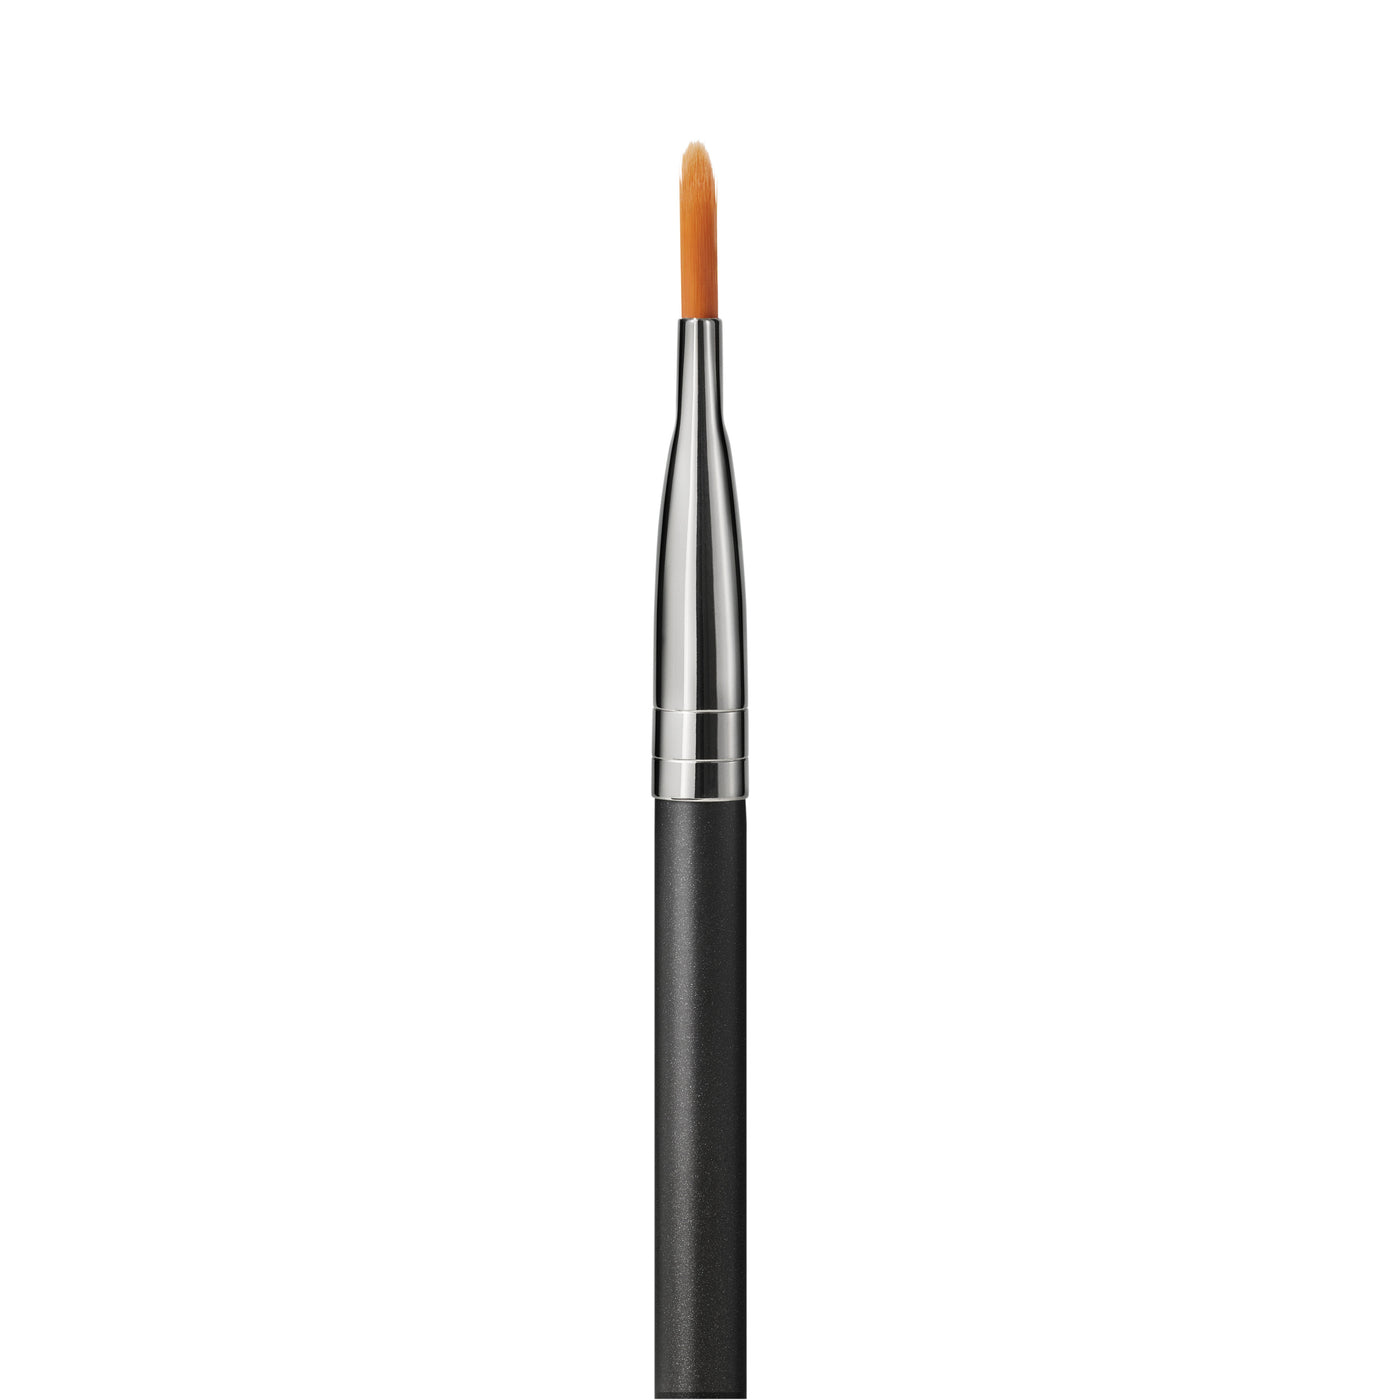 Shop The Latest Collection Of Mâ·Aâ·C 195 Concealer Brush In Lebanon